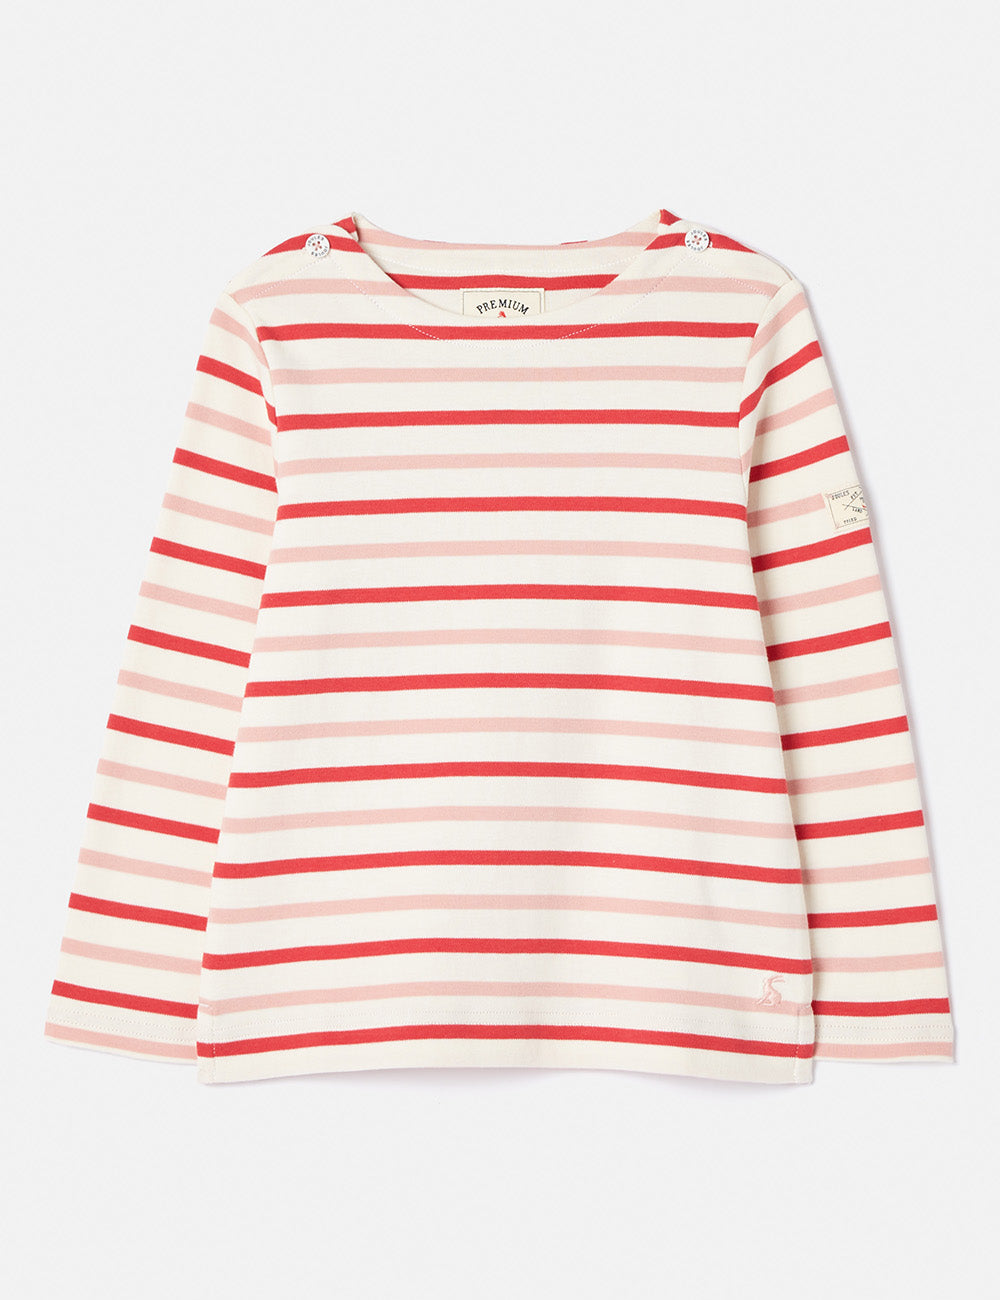 Joules Harbour Long Sleeve T-Shirt - Cream/Pink Stripe